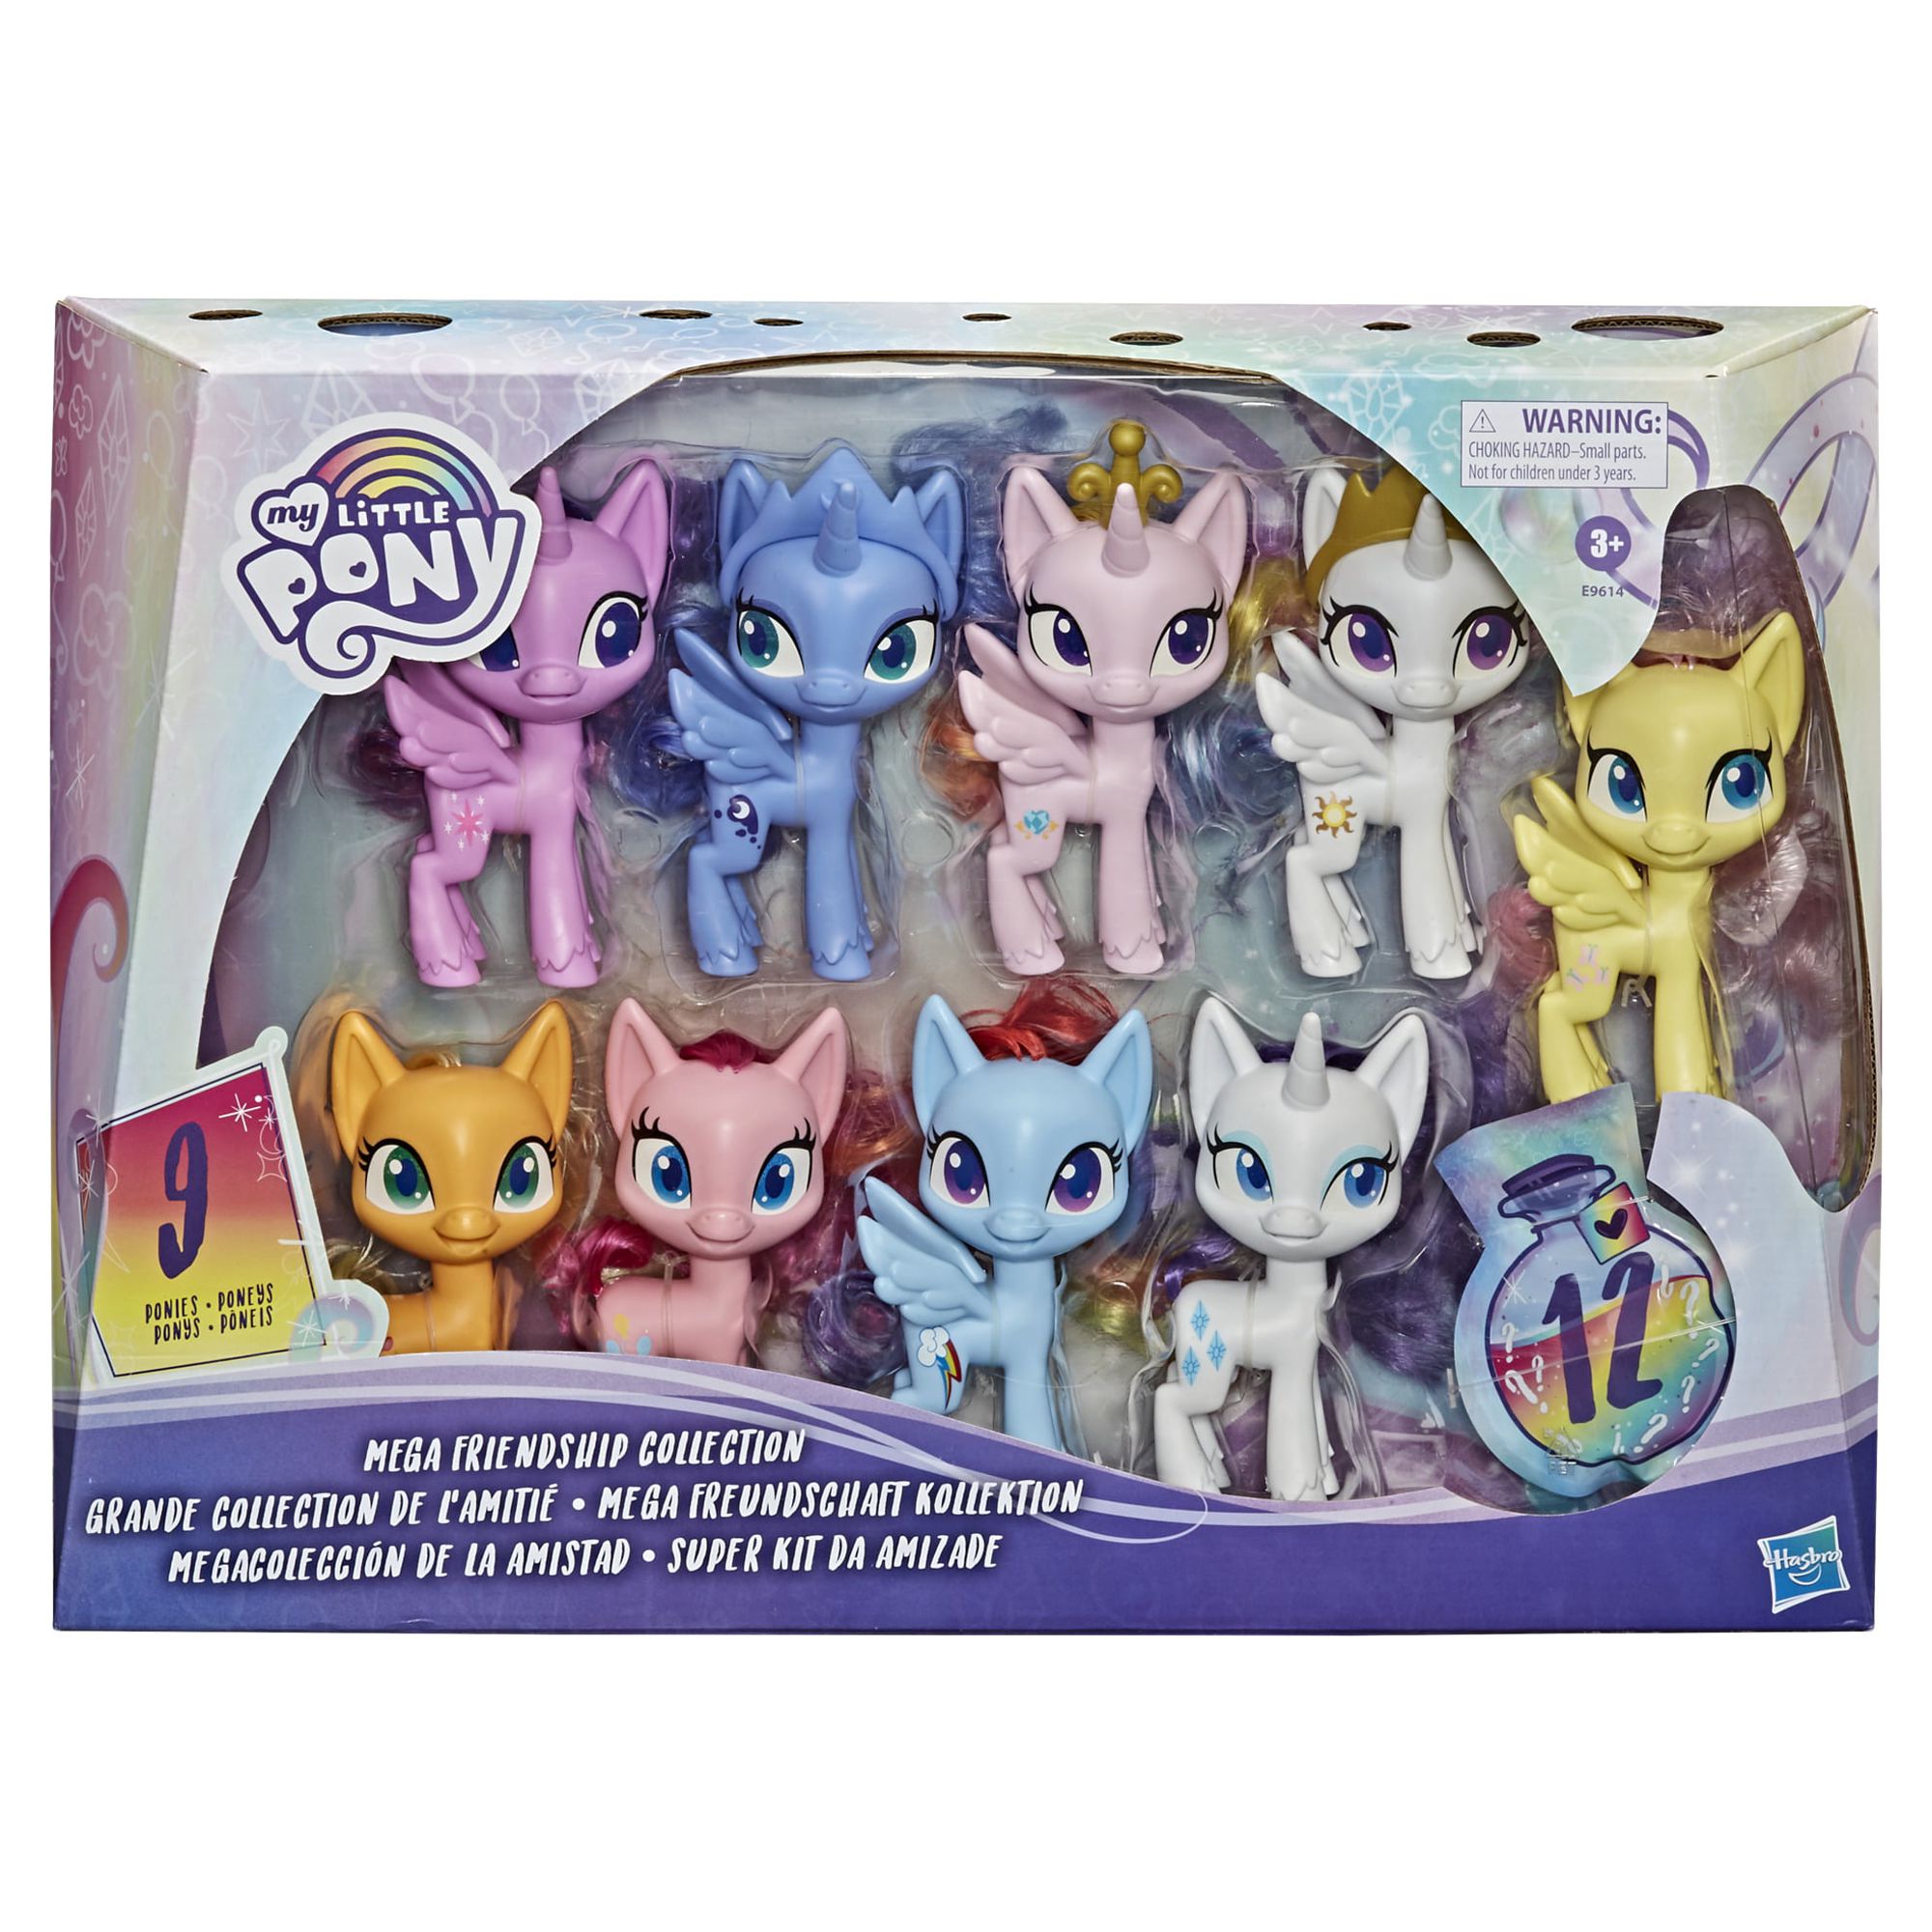 My Little Pony: Mega Friendship Collection 14-Inch Doll Kids Toy for Boys and Girls - image 2 of 9